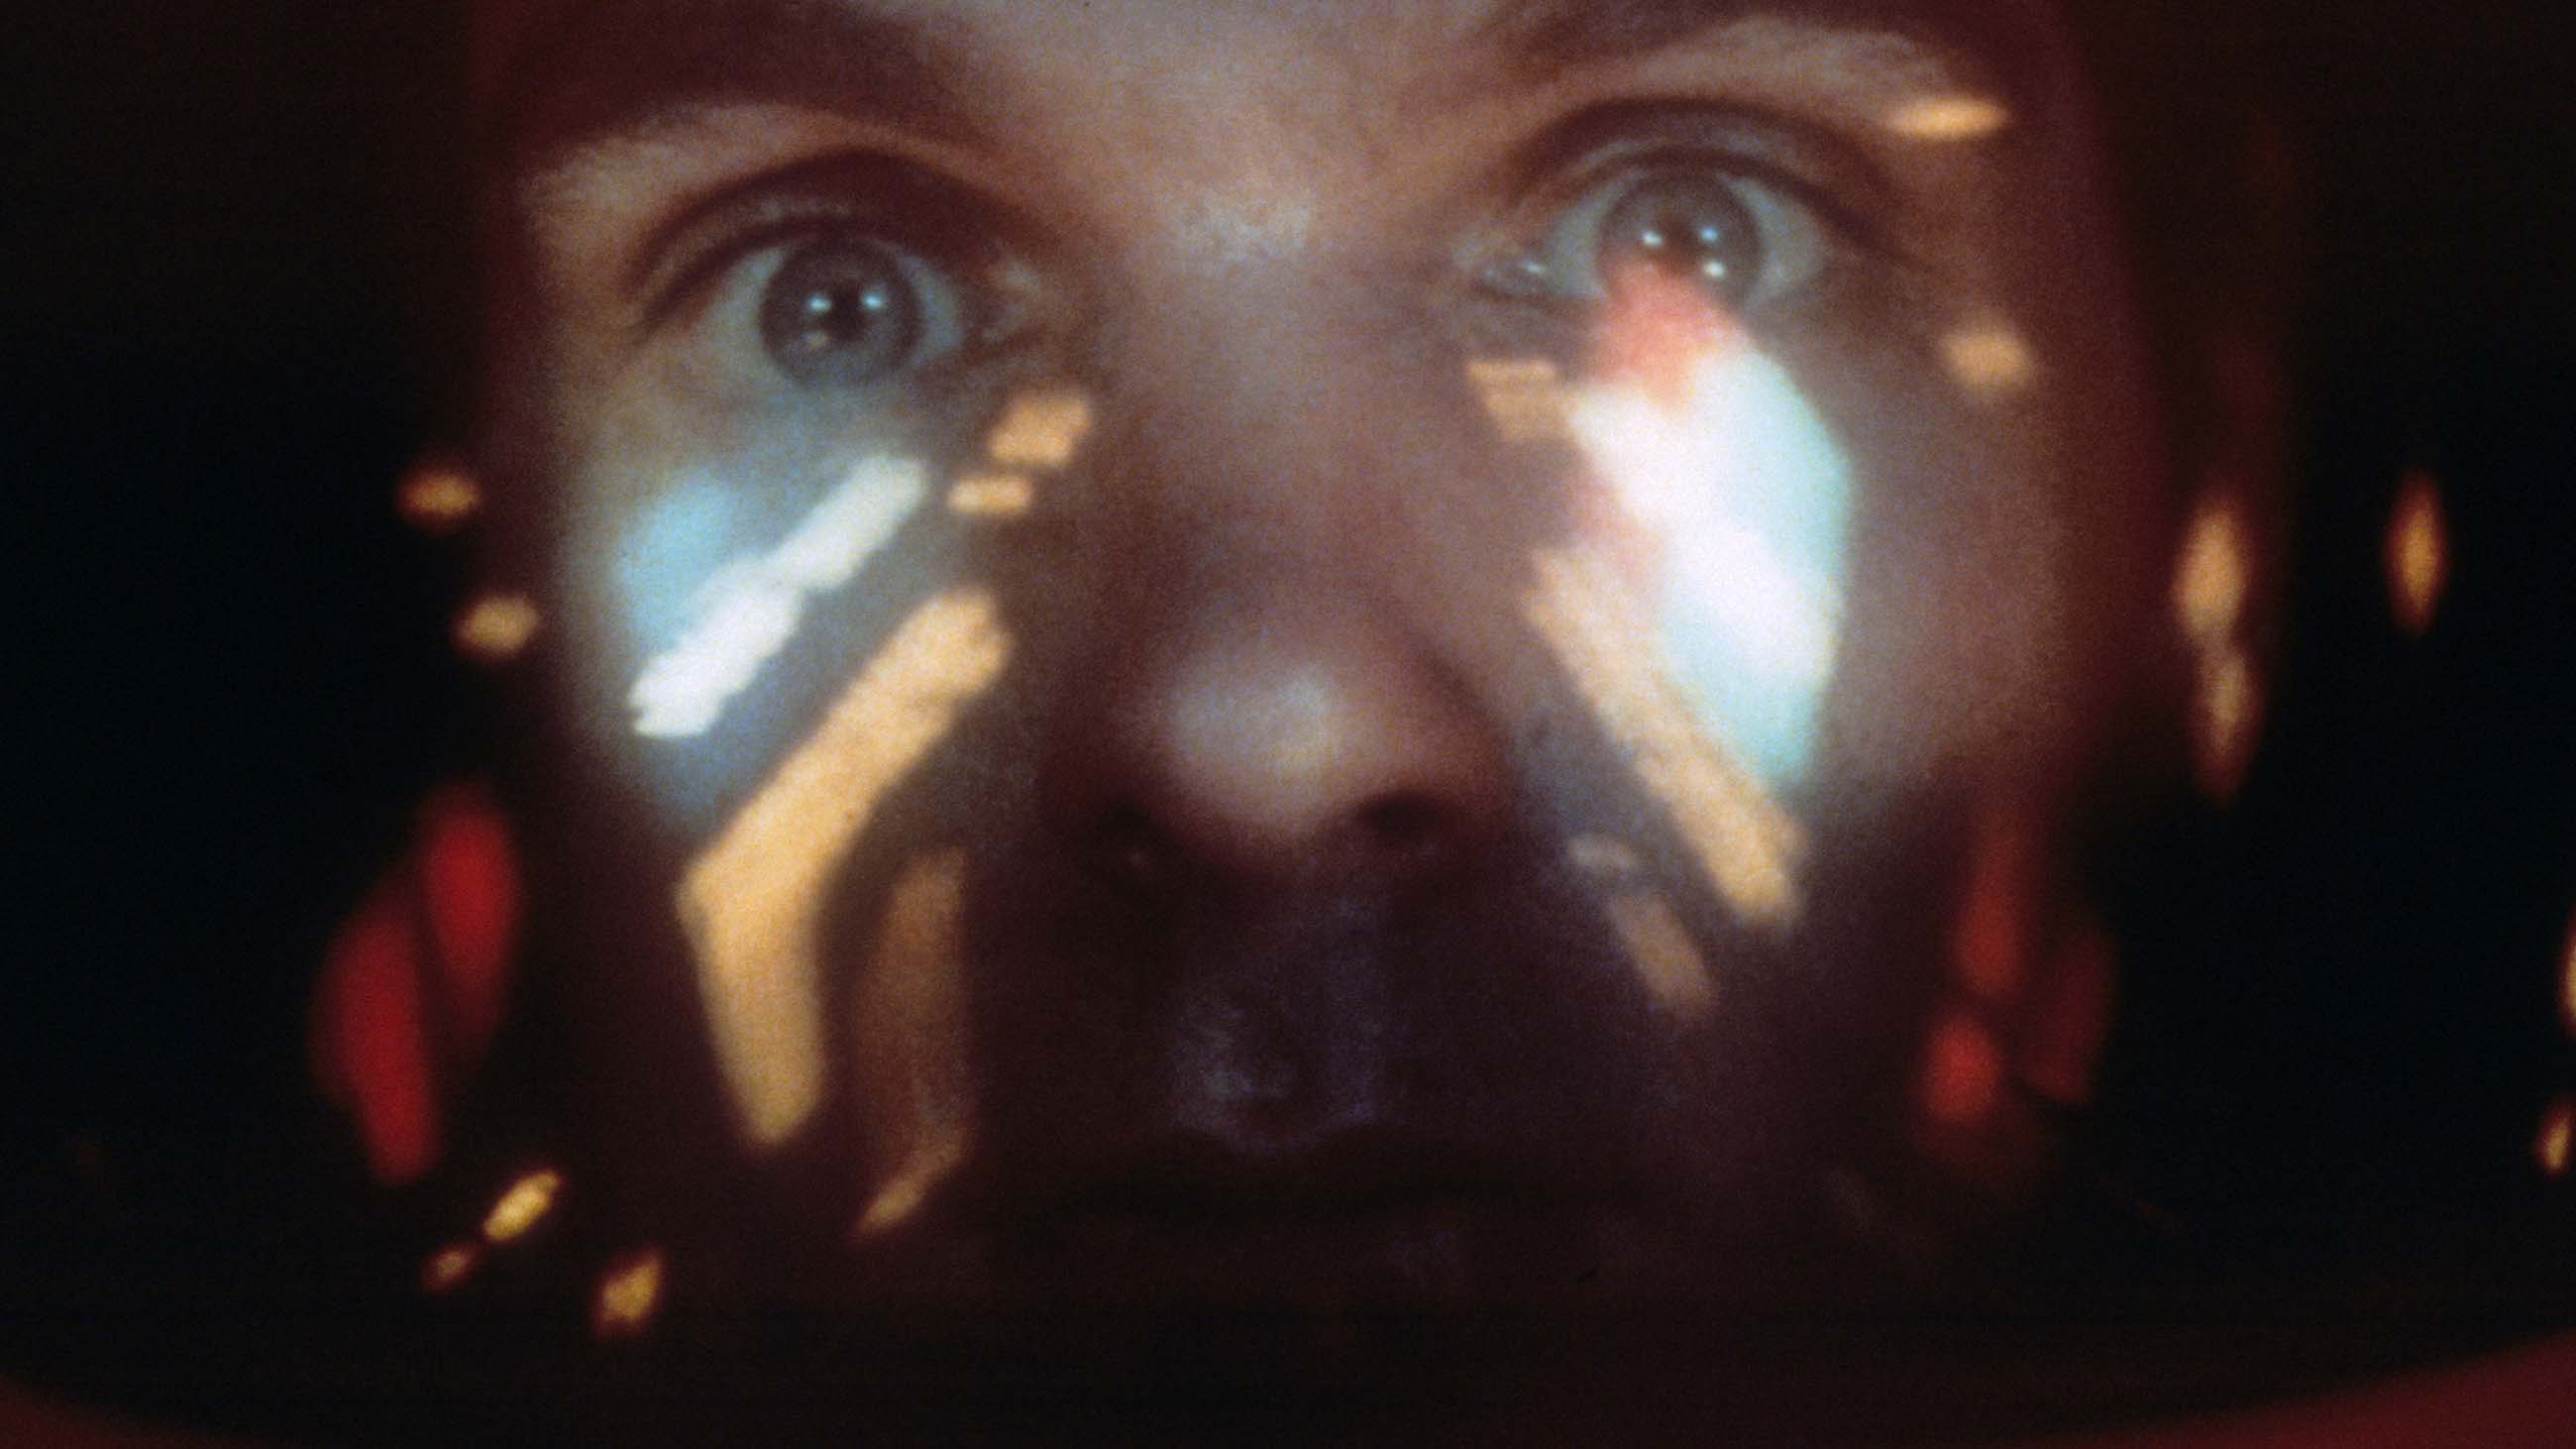 Keir Dullea in a scene from the film '2001: A Space Odyssey', 1968. (Photo by Metro-Goldwyn-Mayer/Getty Images)